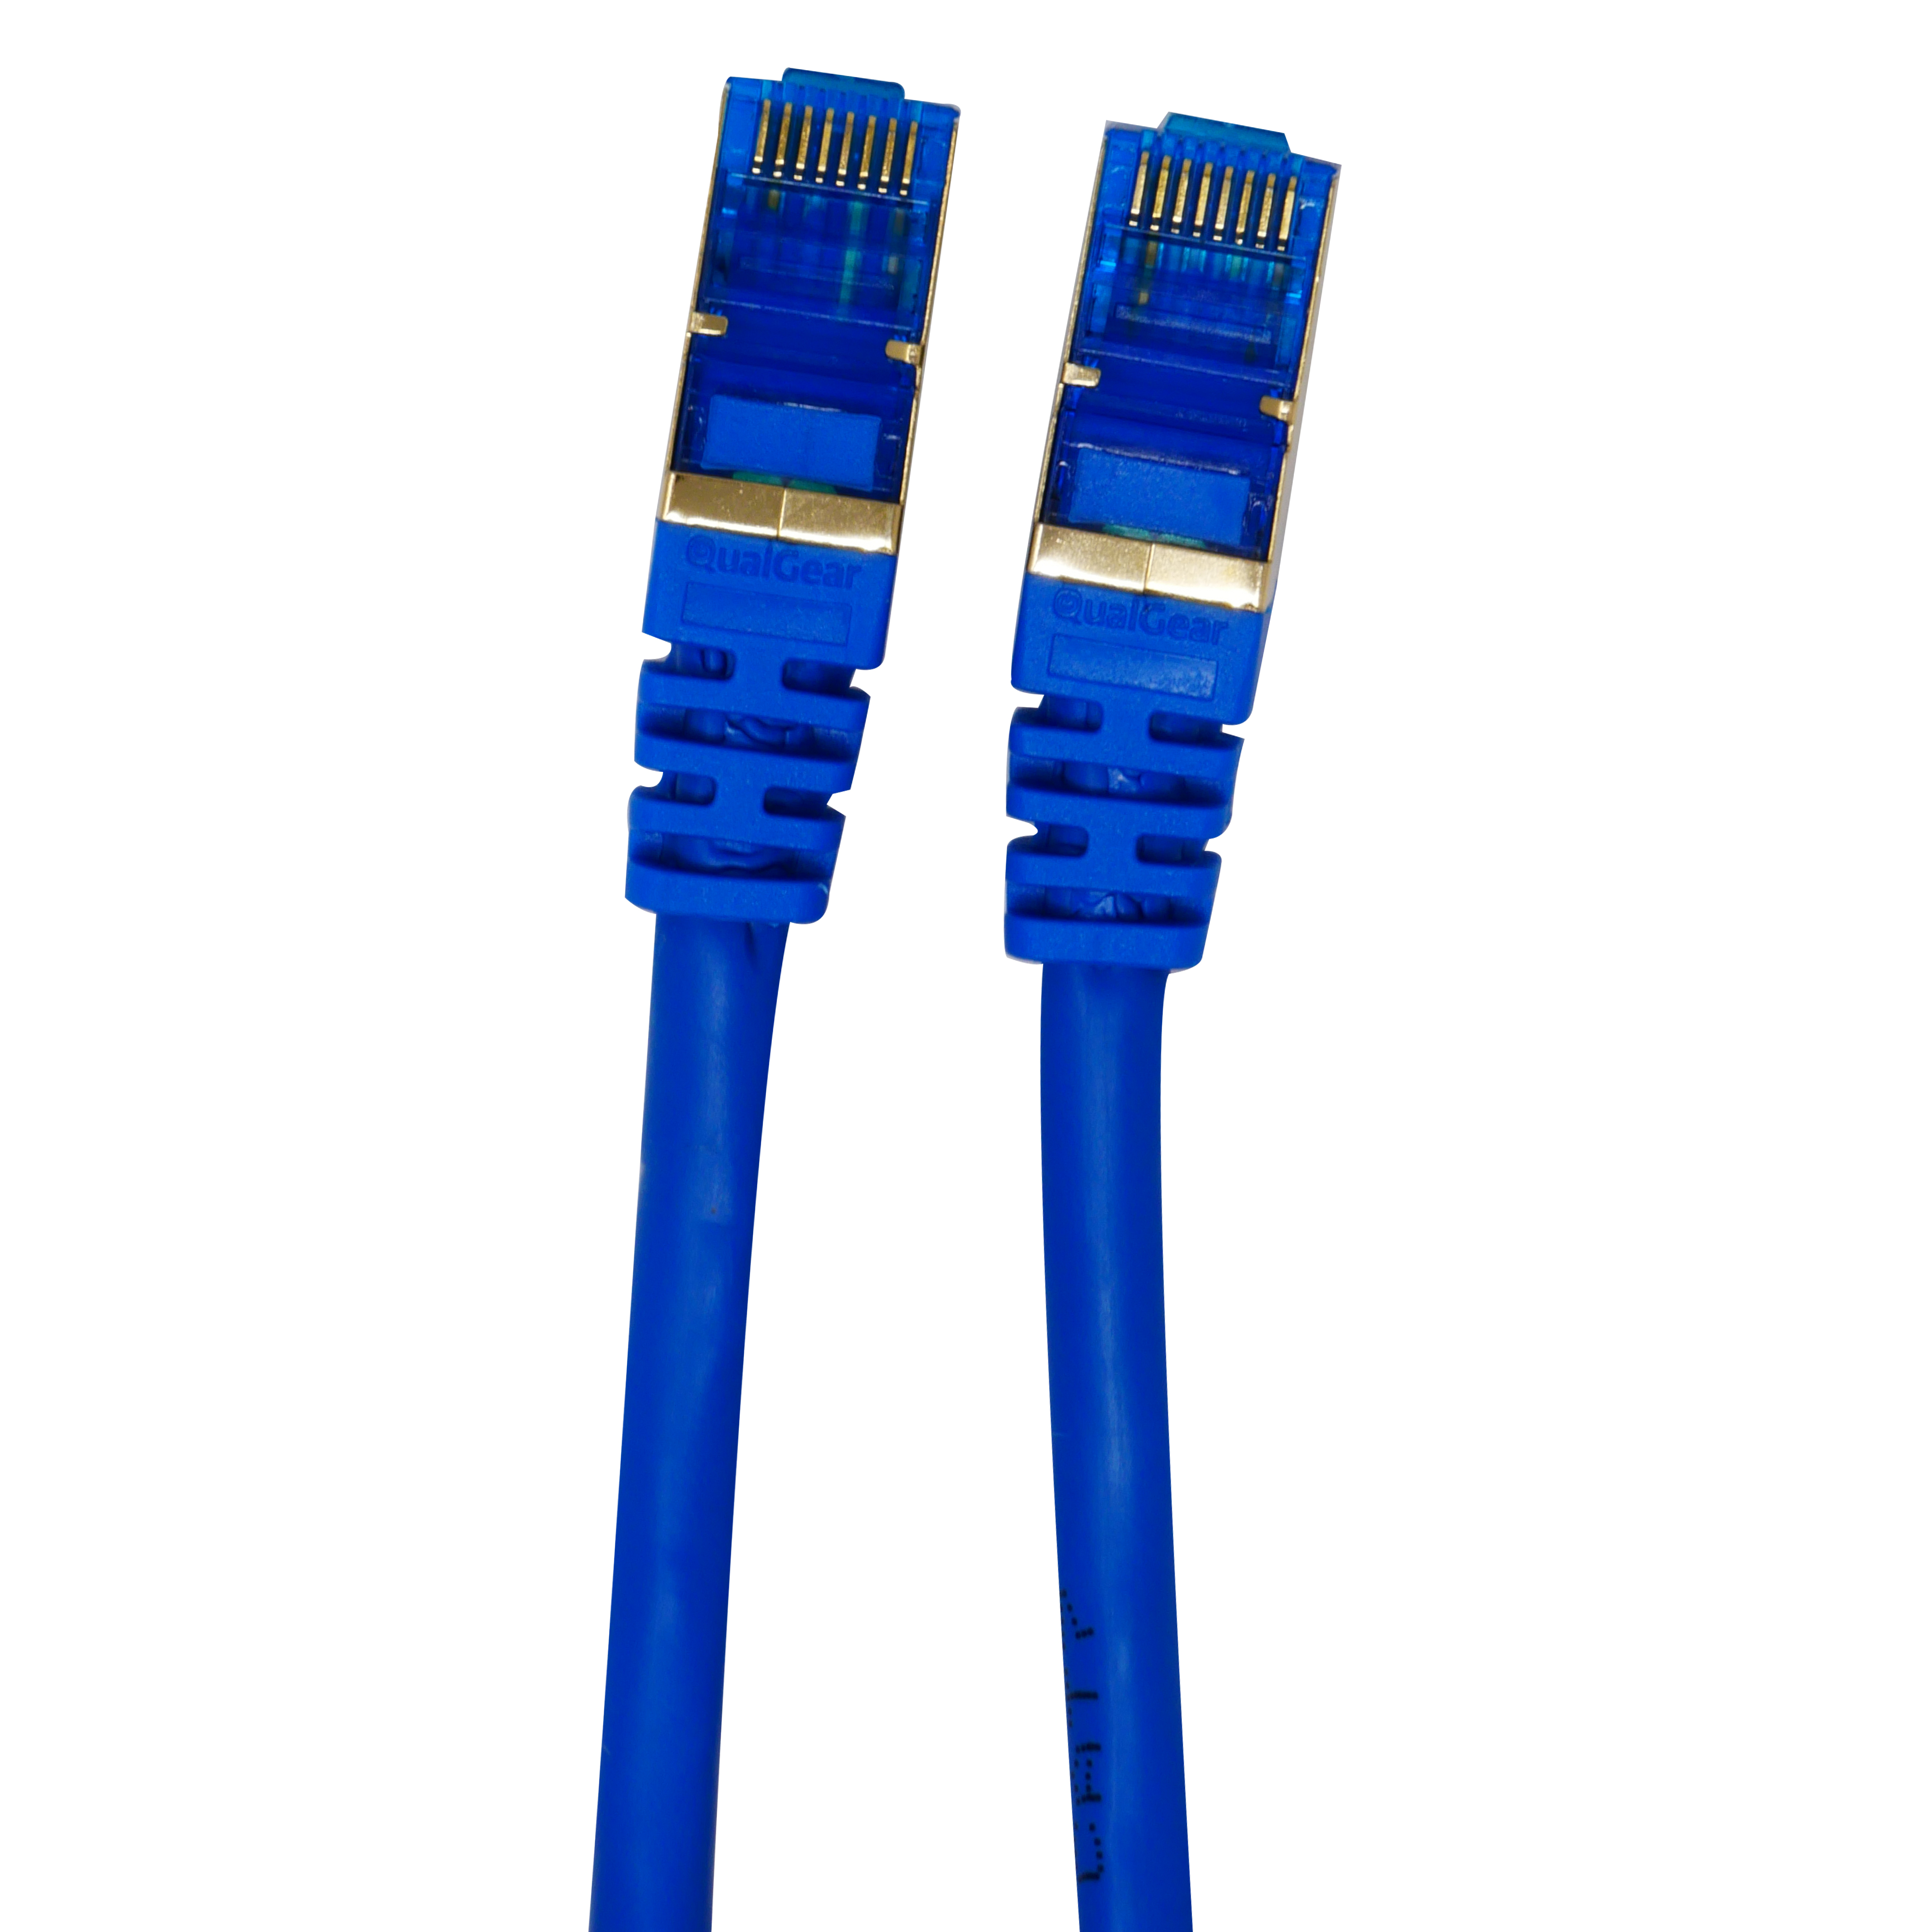 QualGear QG-CAT7R-20FT-BLU CAT 7 S/FTP Ethernet Cable Length 20 feet - 26 AWG, 10 Gbps, Gold Plated Contacts, RJ45, 99.99% OFC Copper, Color Blue 